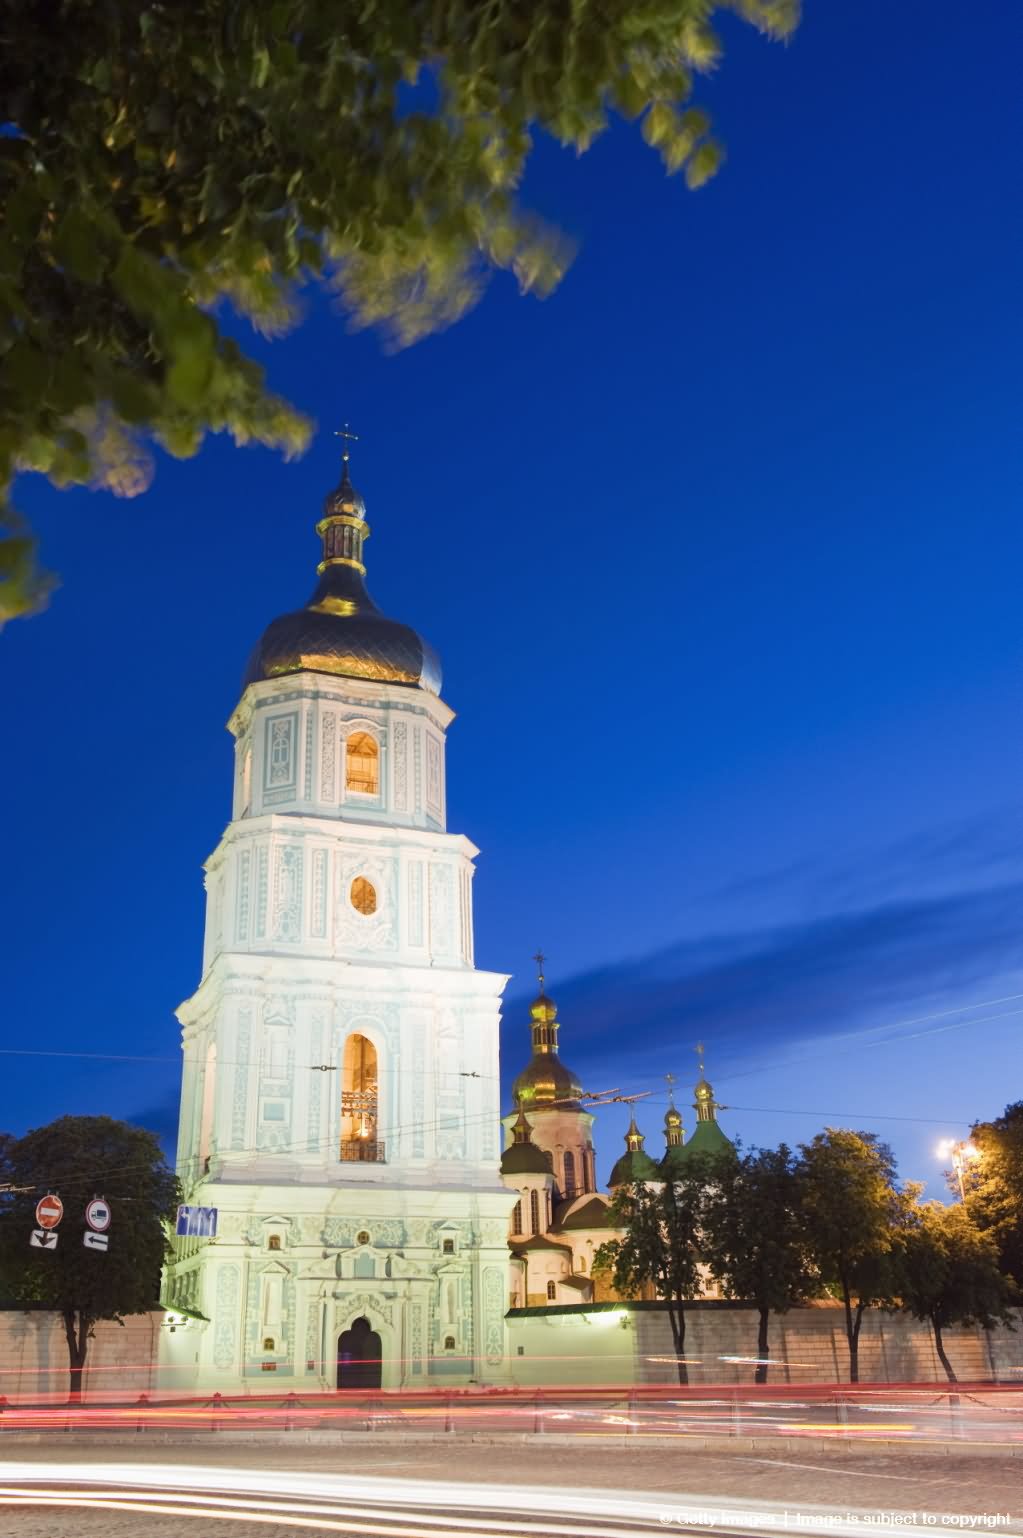 20Incredible Night View Images And Photos Of The Saint Sophia Cathedral In Ukraine